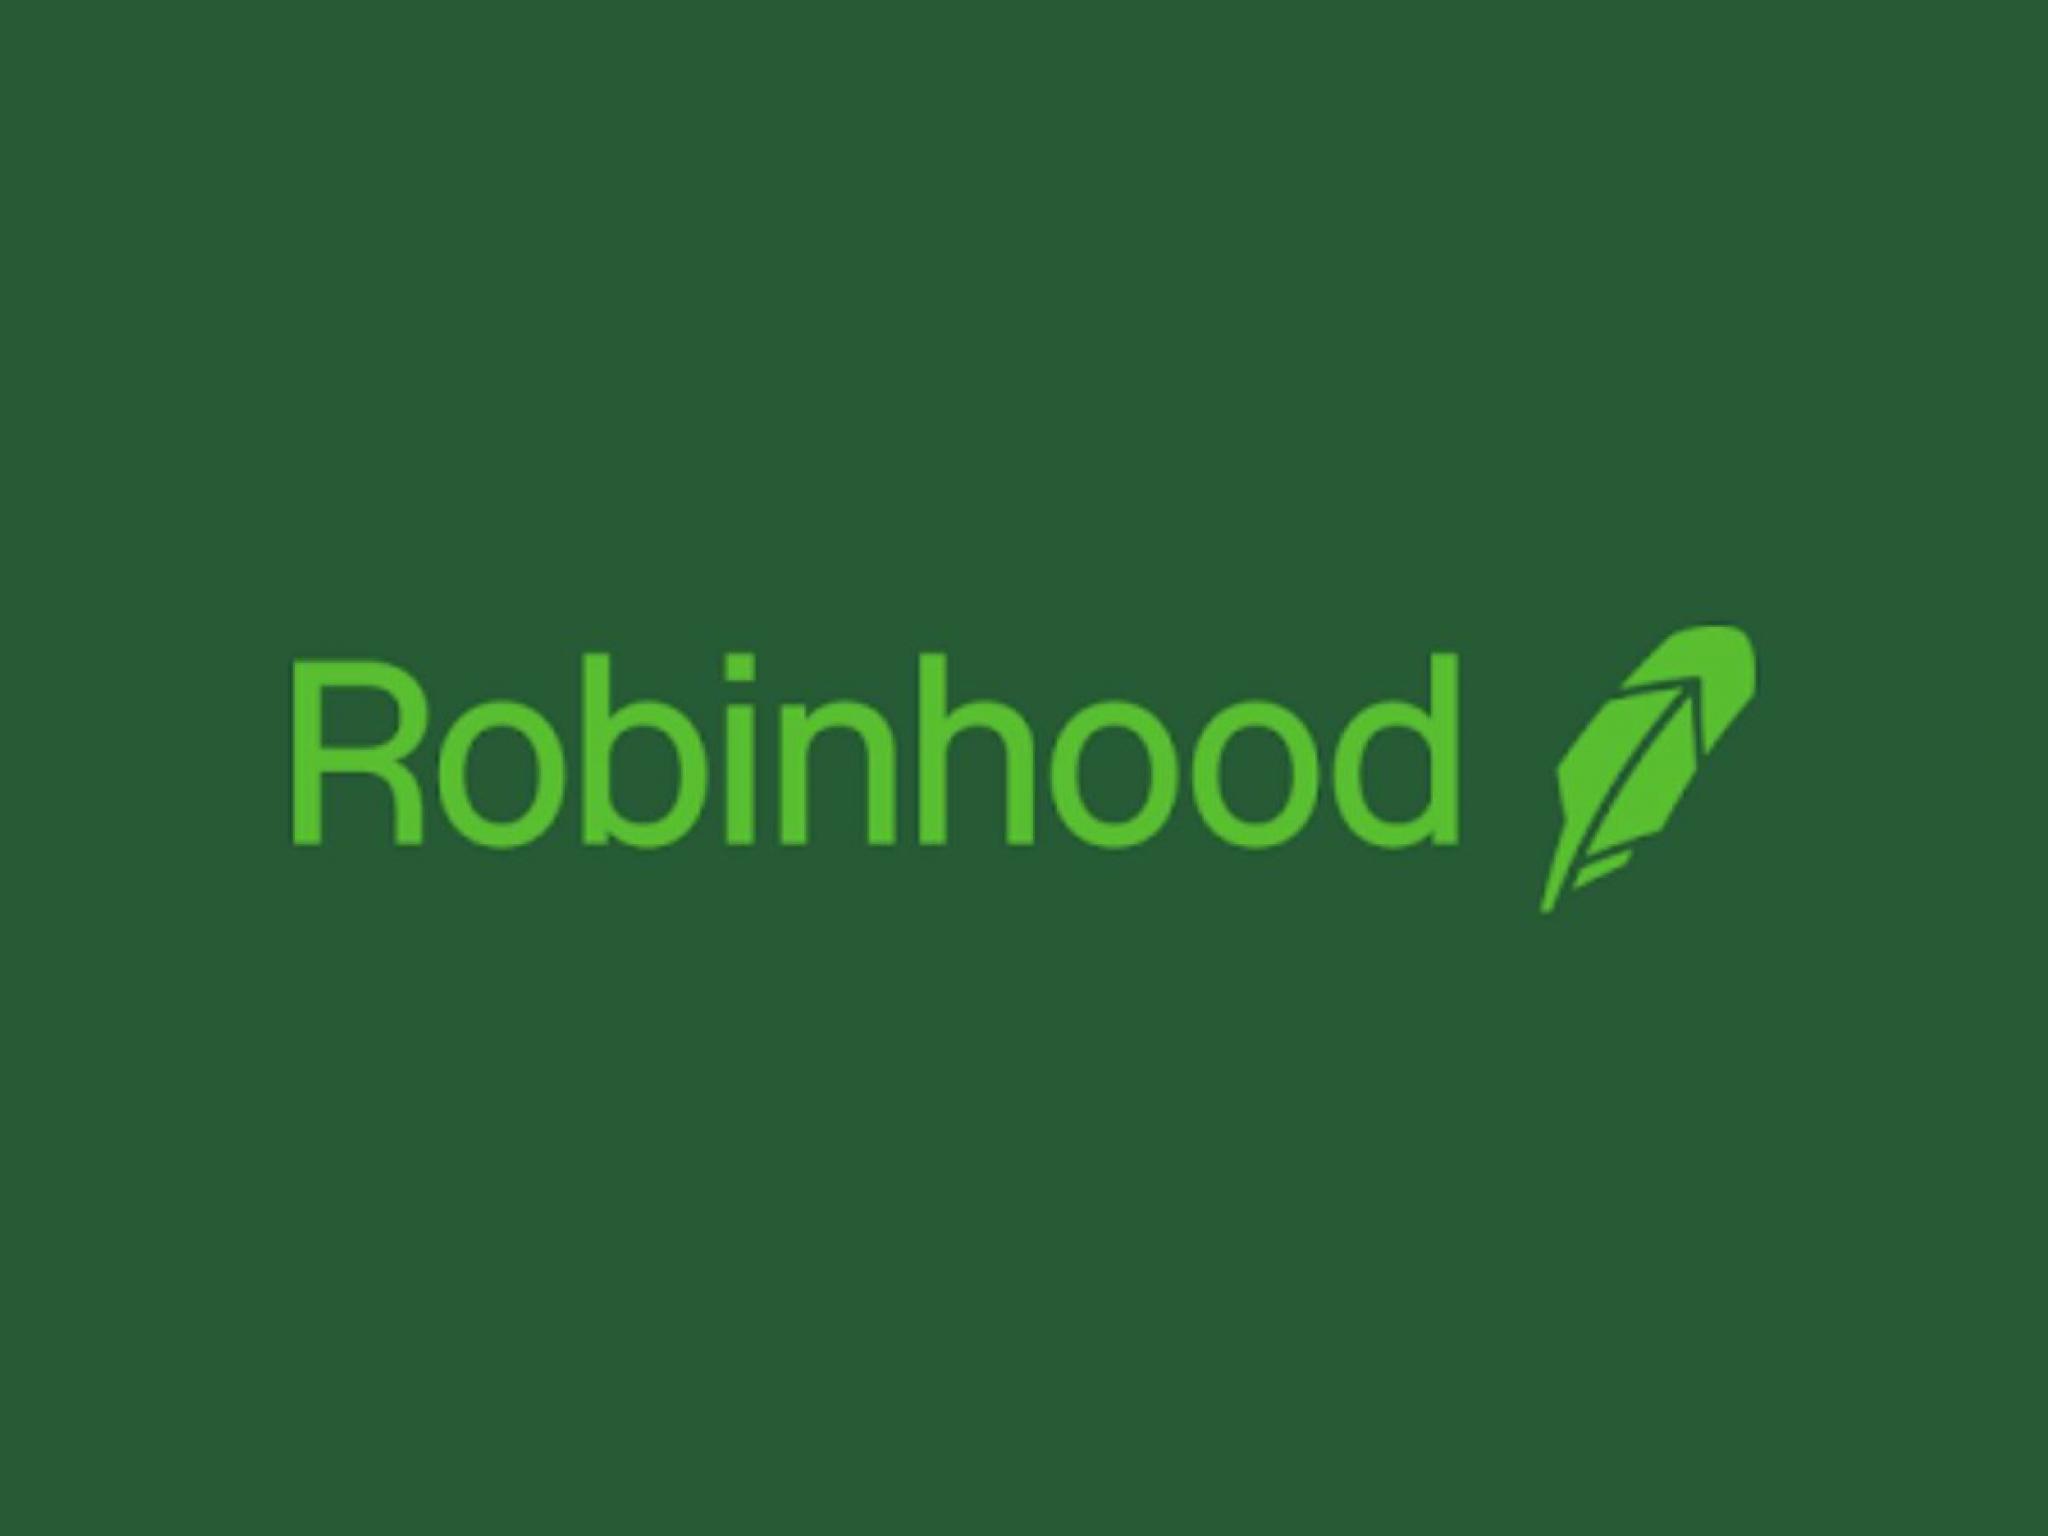  robinhood-to-rally-around-51-here-are-10-top-analyst-forecasts-for-tuesday 